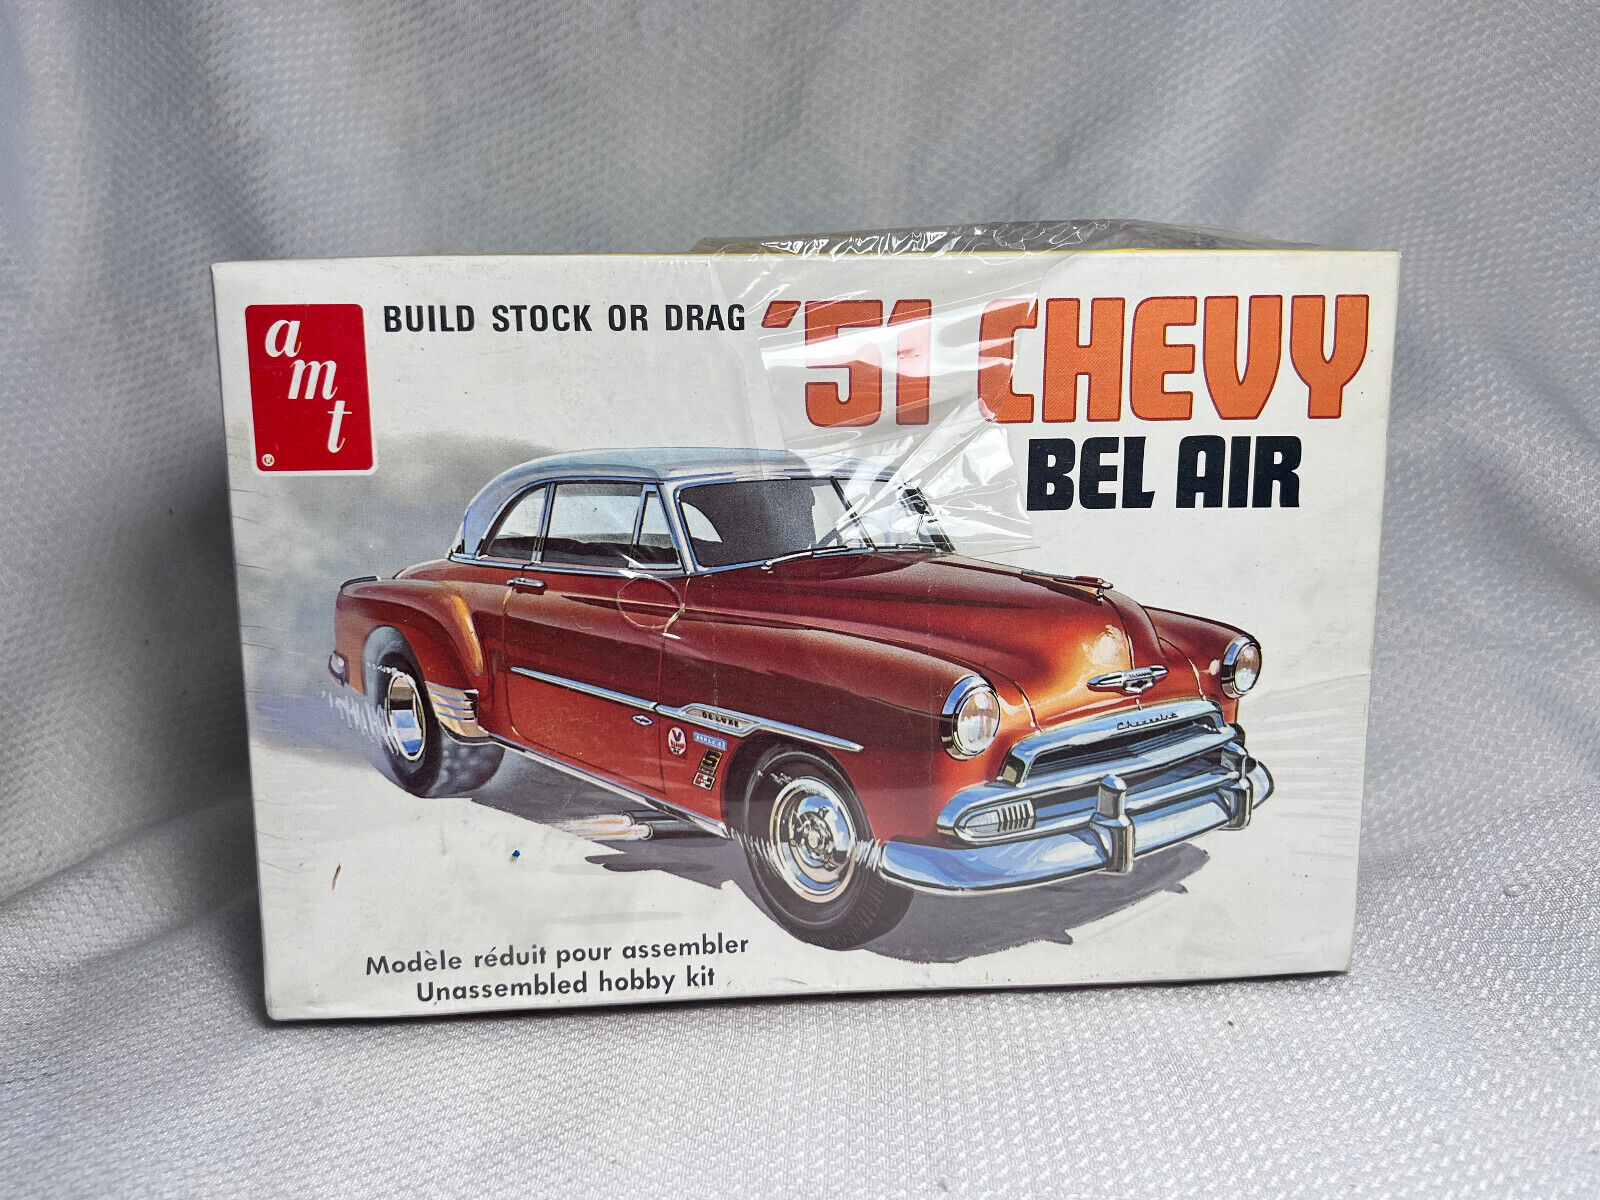 NOS AMT T295 '51 Chevy Bel Air Build Stock Or Drag Unassembled Hobby Kit Sealed - $29.95